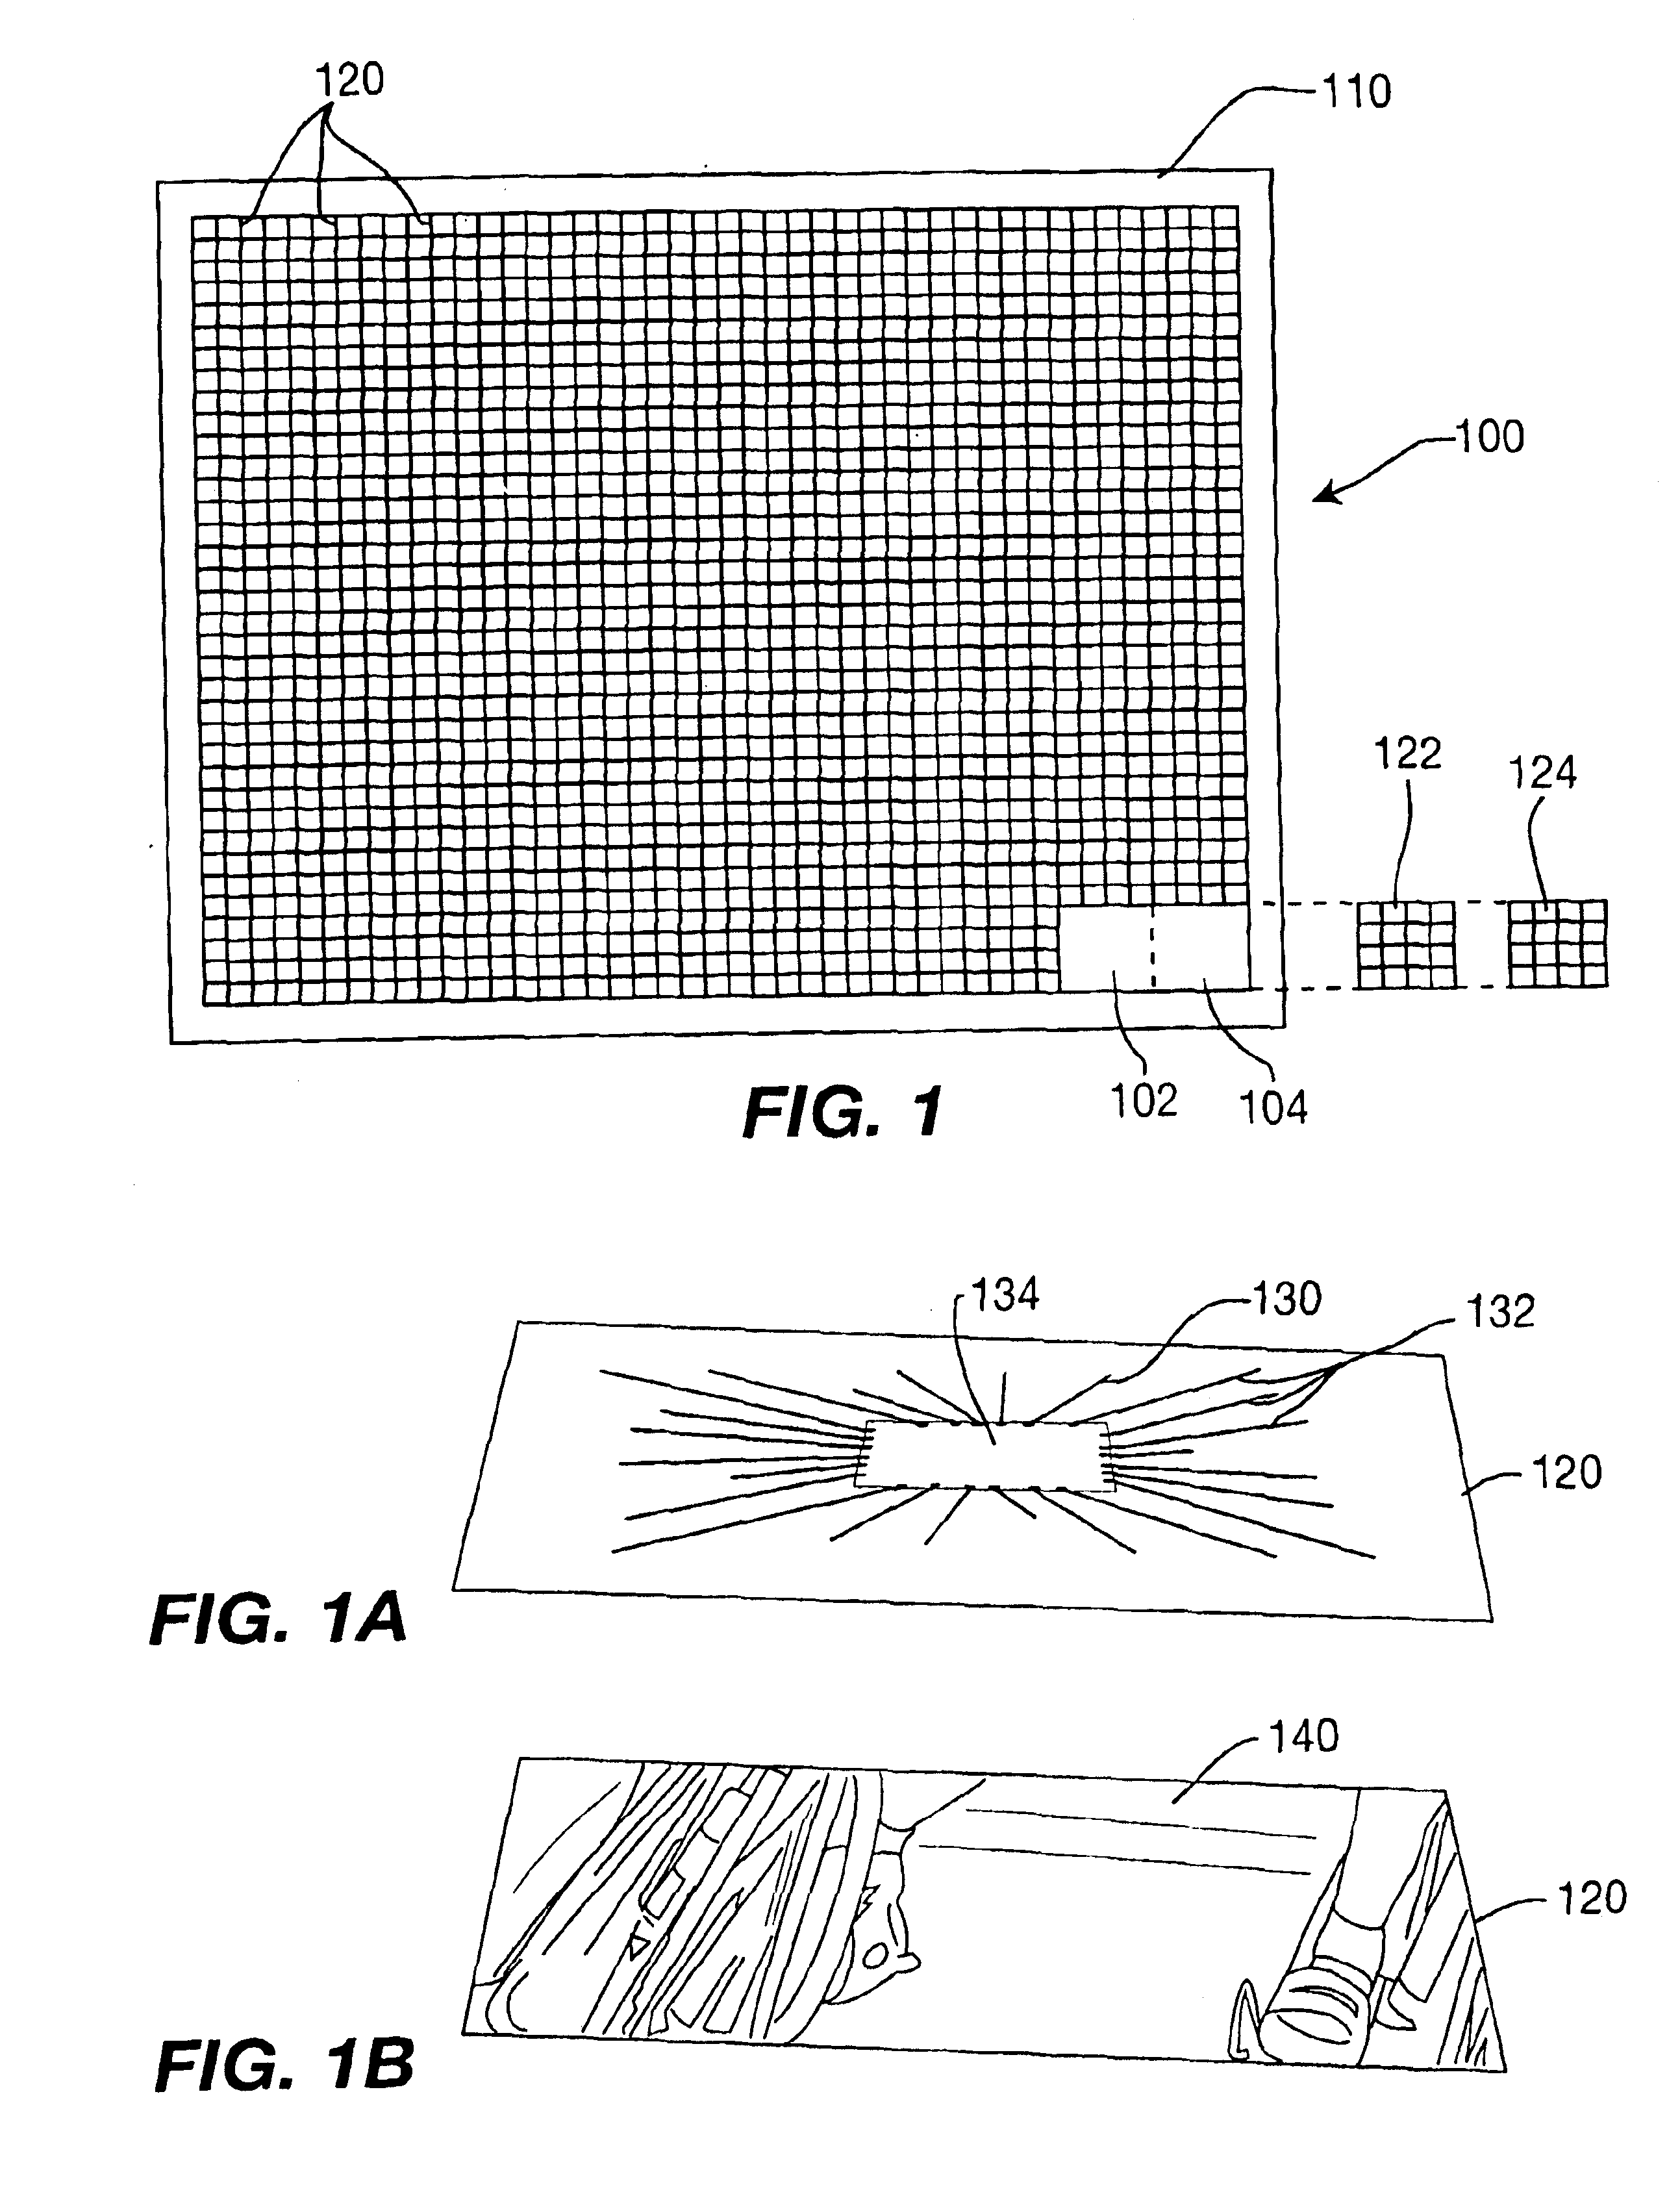 Tiled electronic display structure